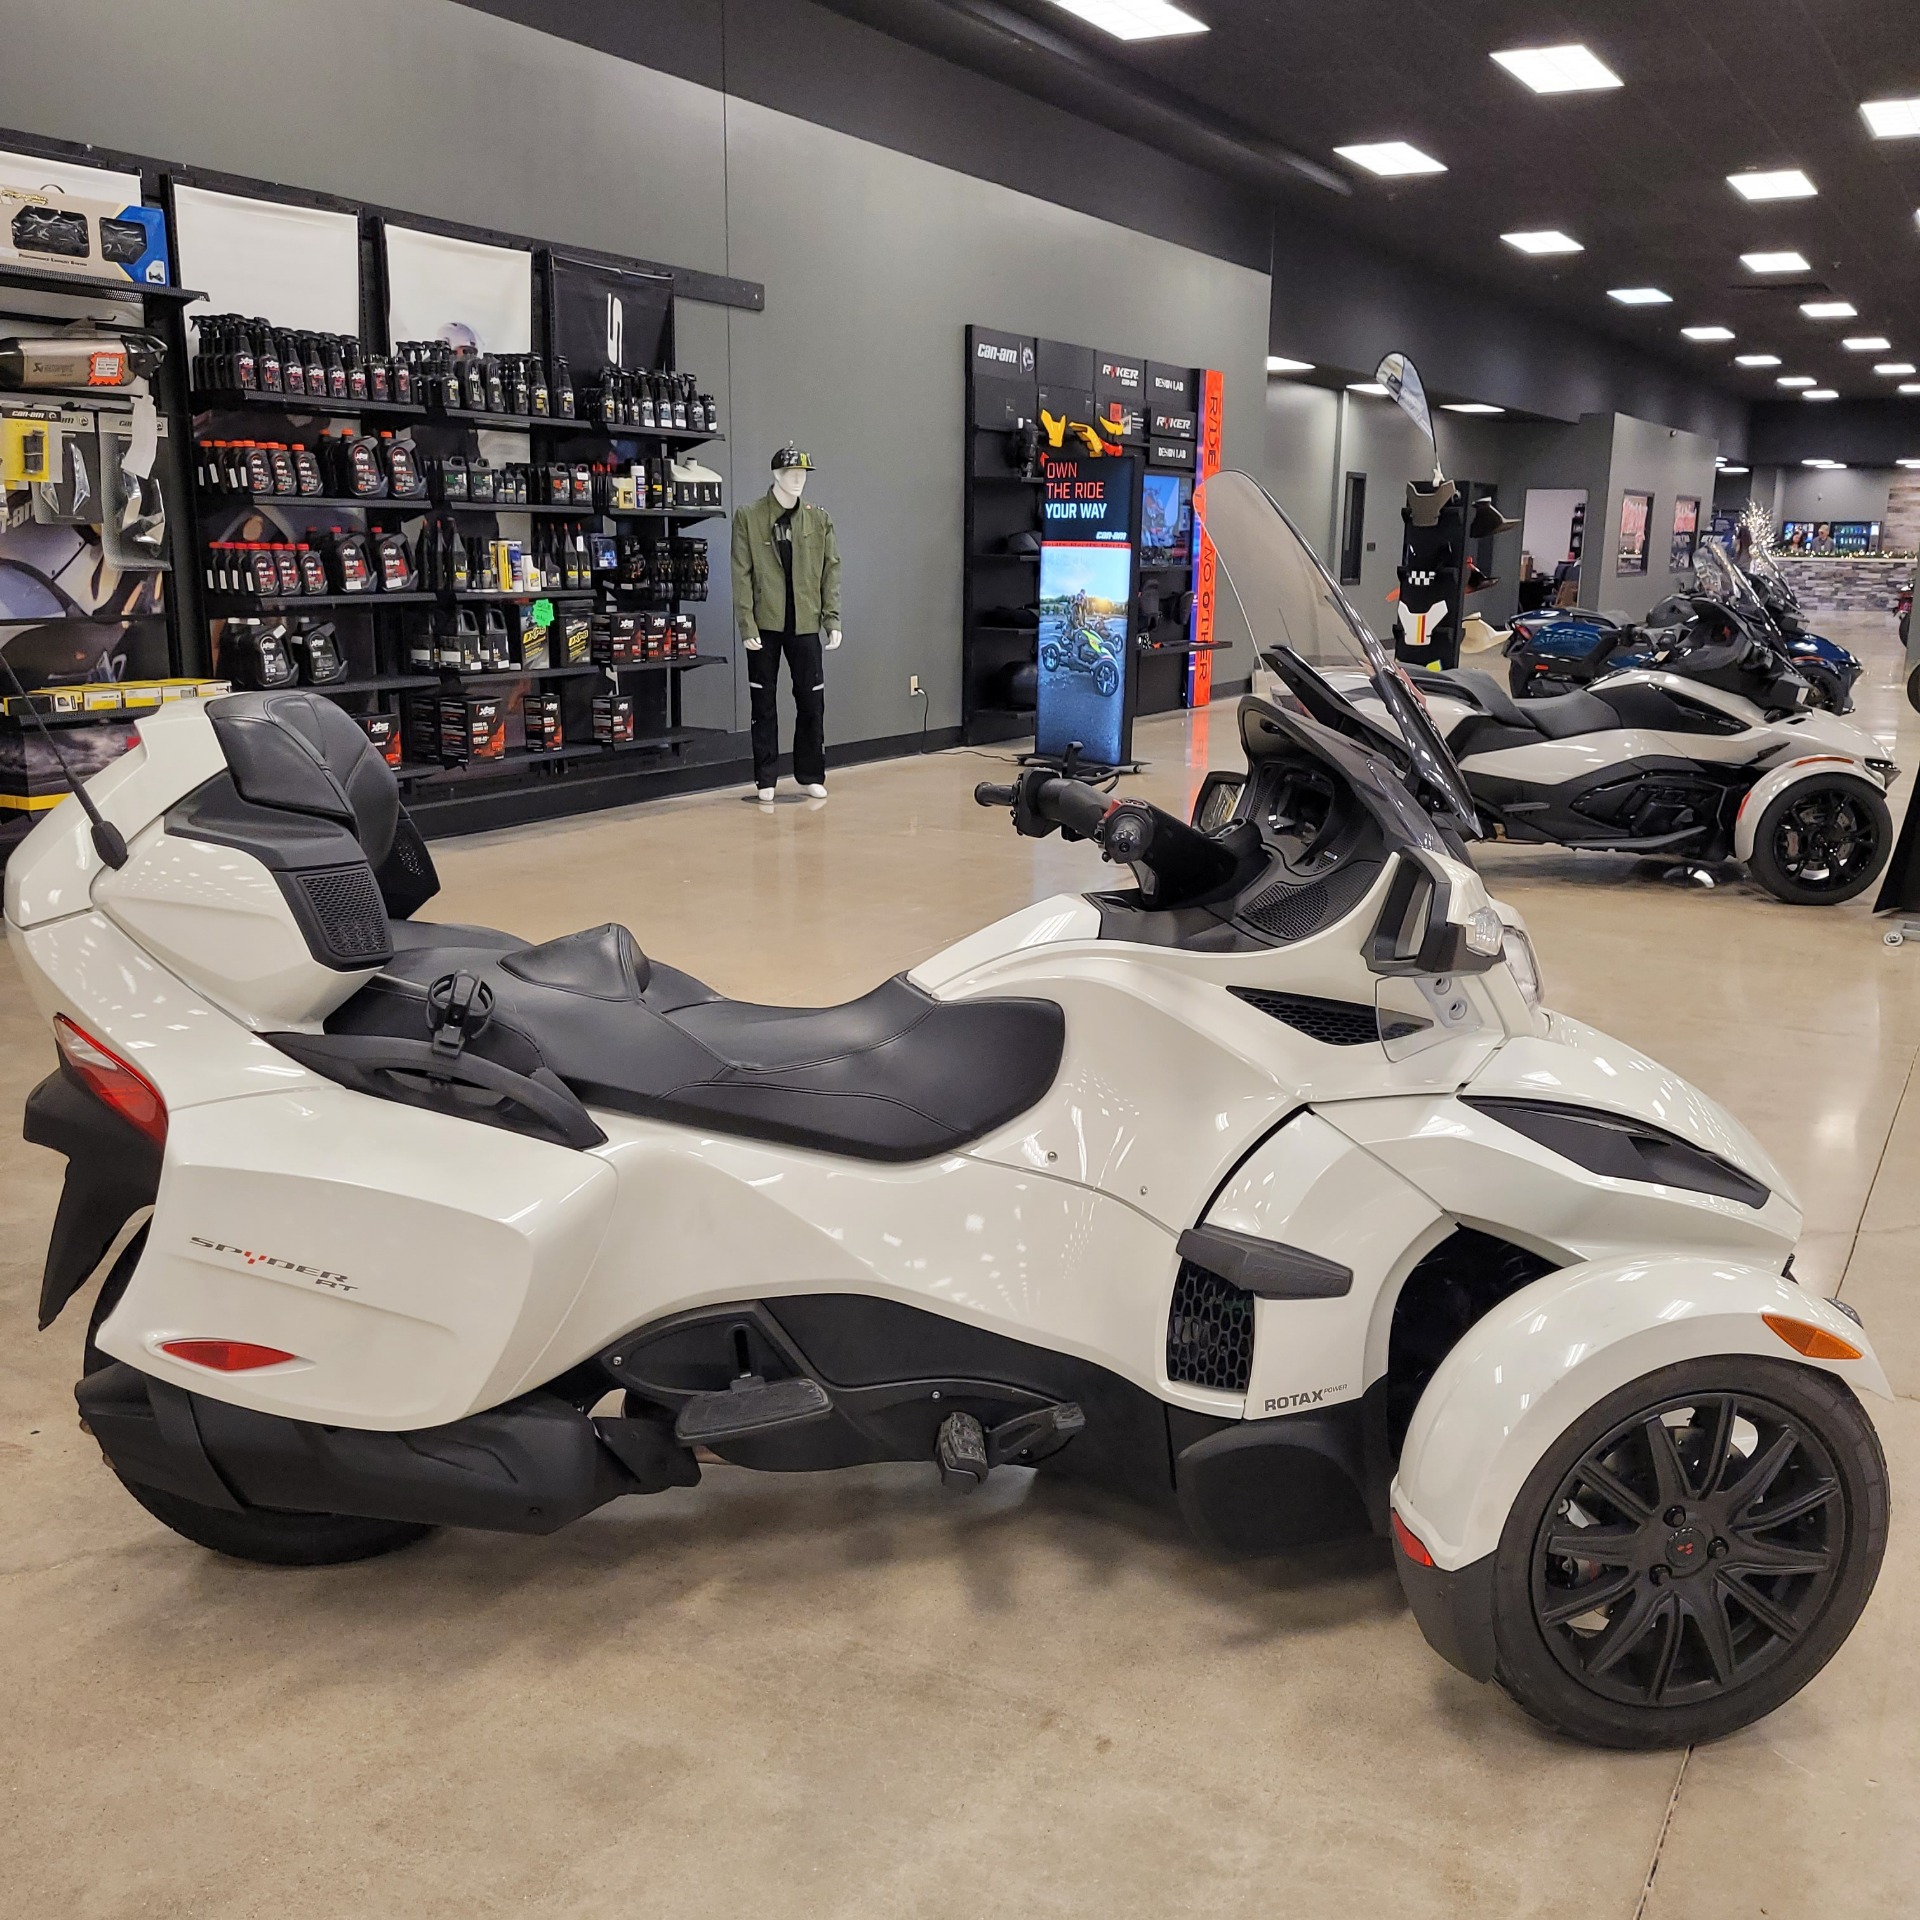 2018 Can-Am Spyder RT SE6 in Middletown, Ohio - Photo 4